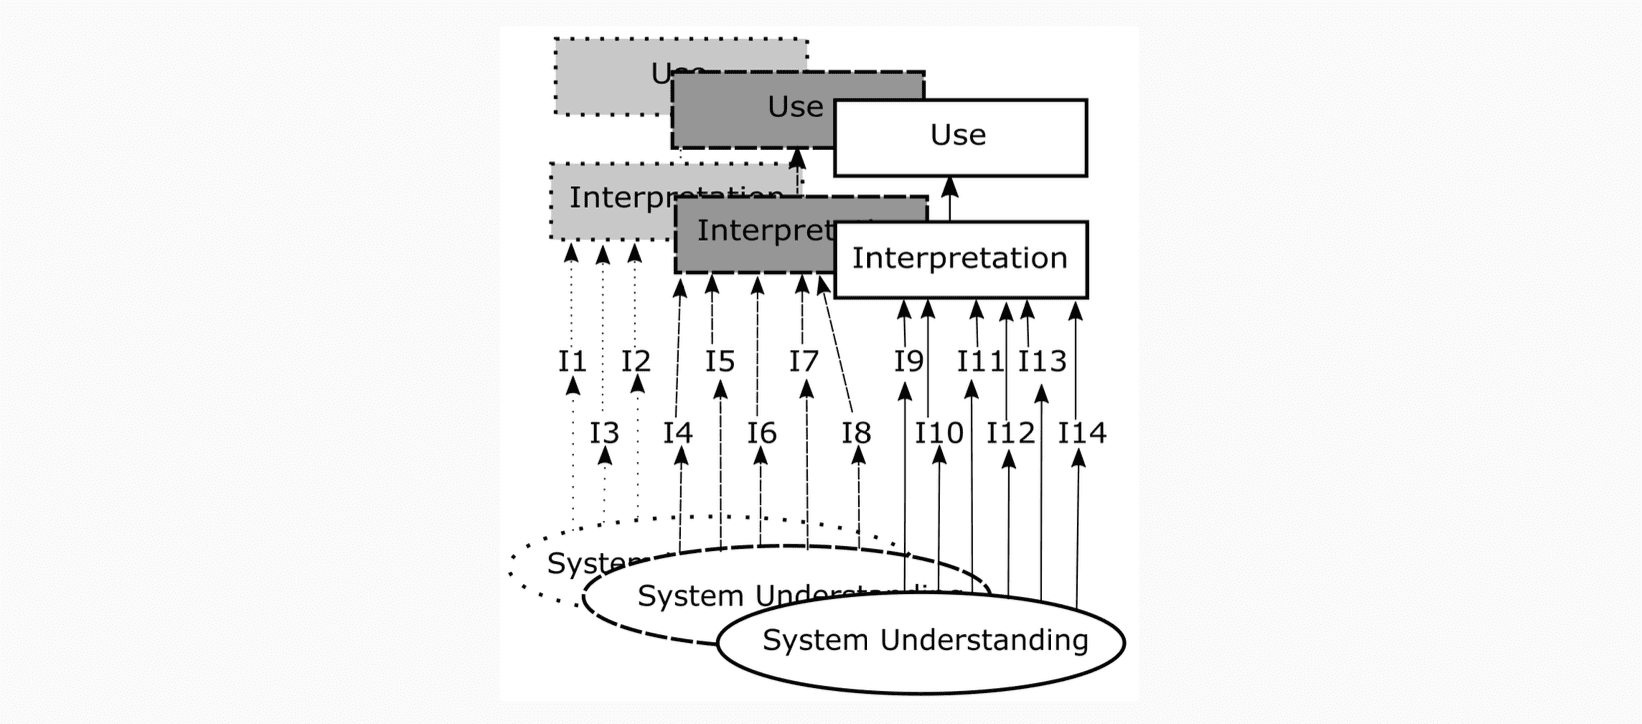 Figure 2: The concept of indicators as applied to highly contested and badly understood systems. While there are multiple conflicting understandings of contested systems, a given indicator set can only represent one (or a small subset) of those understandings.